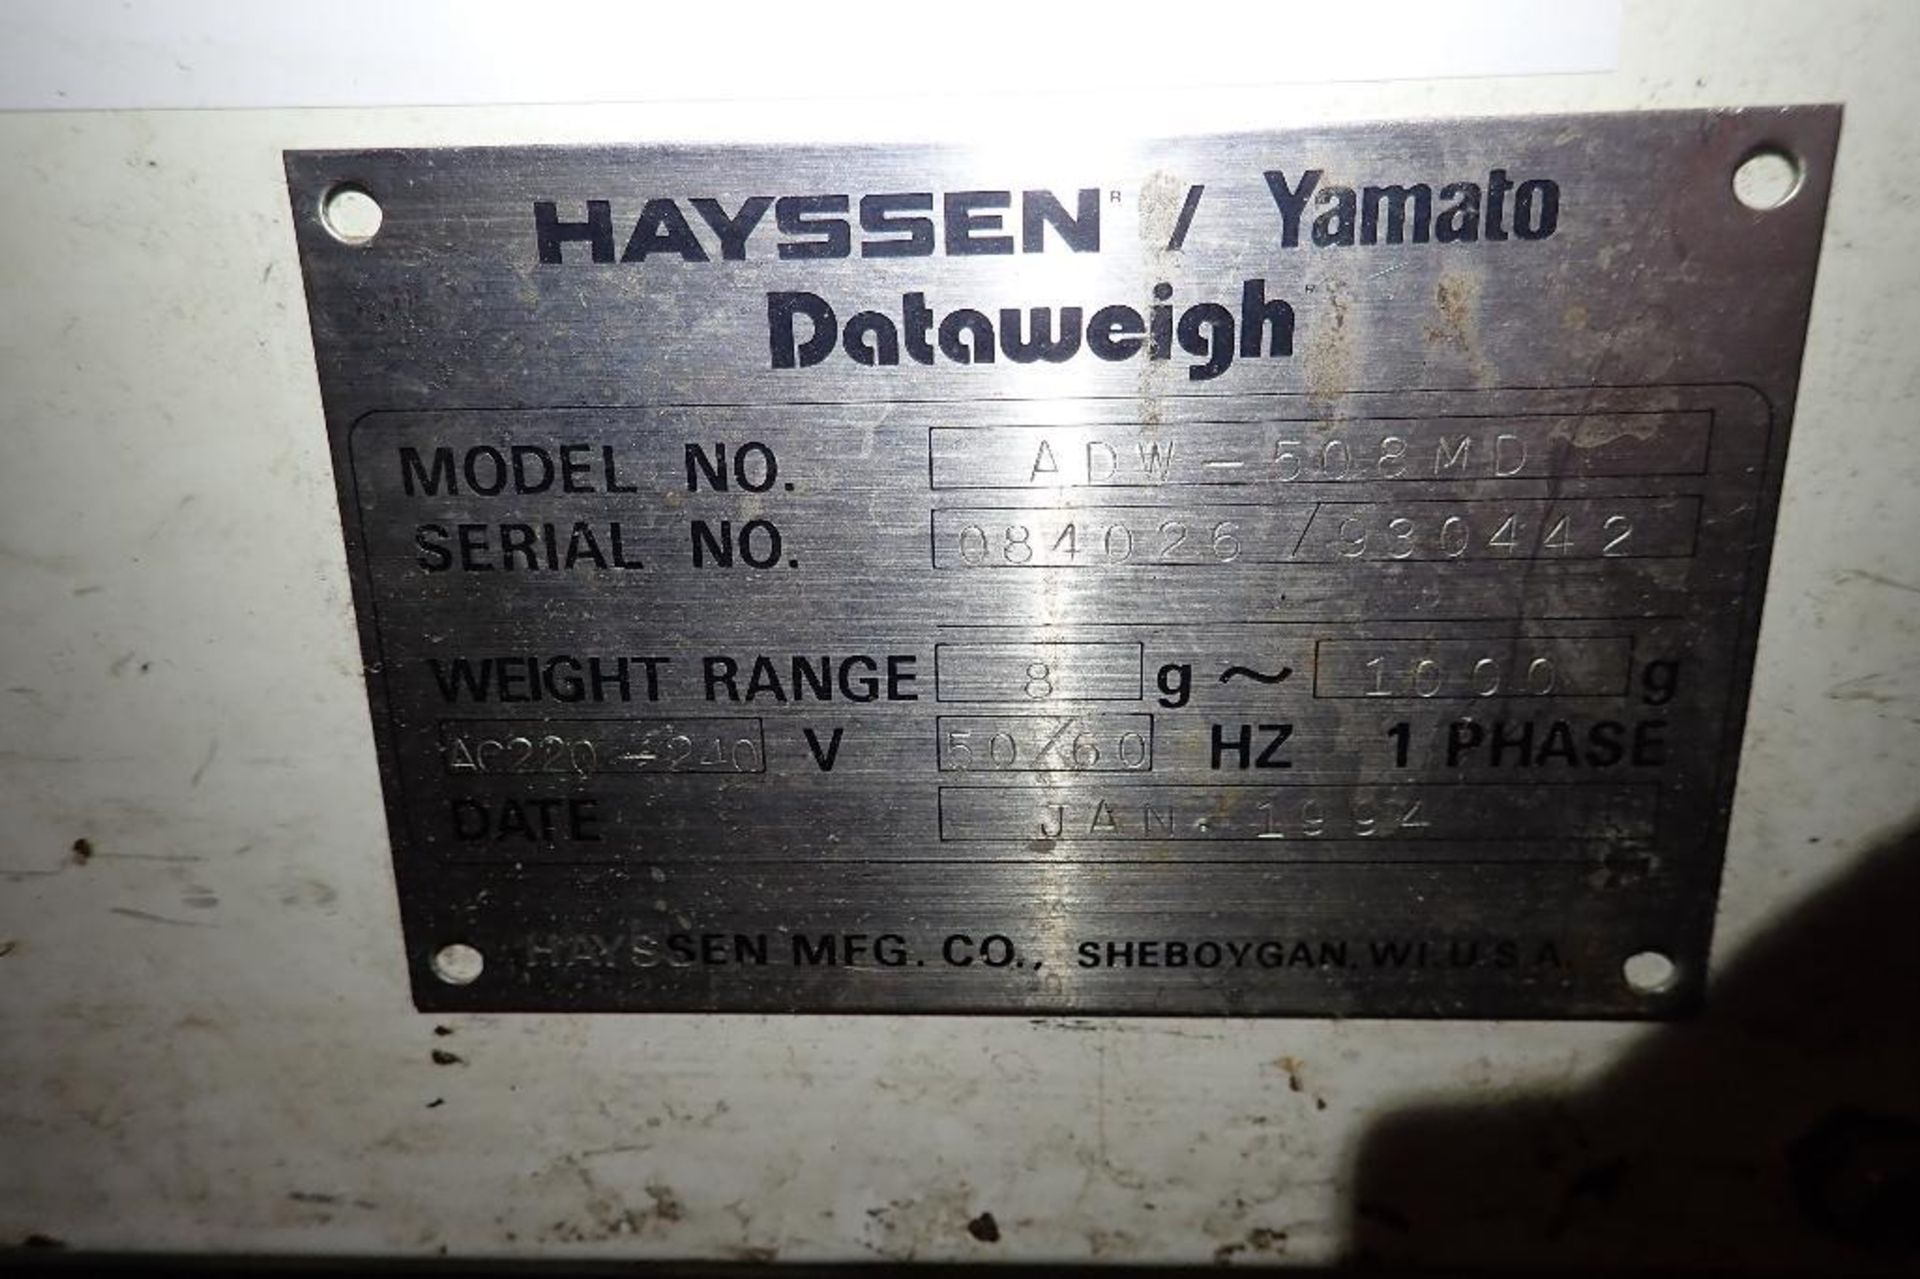 1994 Hayssen Yamato data weigh 8 head scale, Model ADW-508MD, SN 084026/930442, 8 g to 1000 g capaci - Image 11 of 34